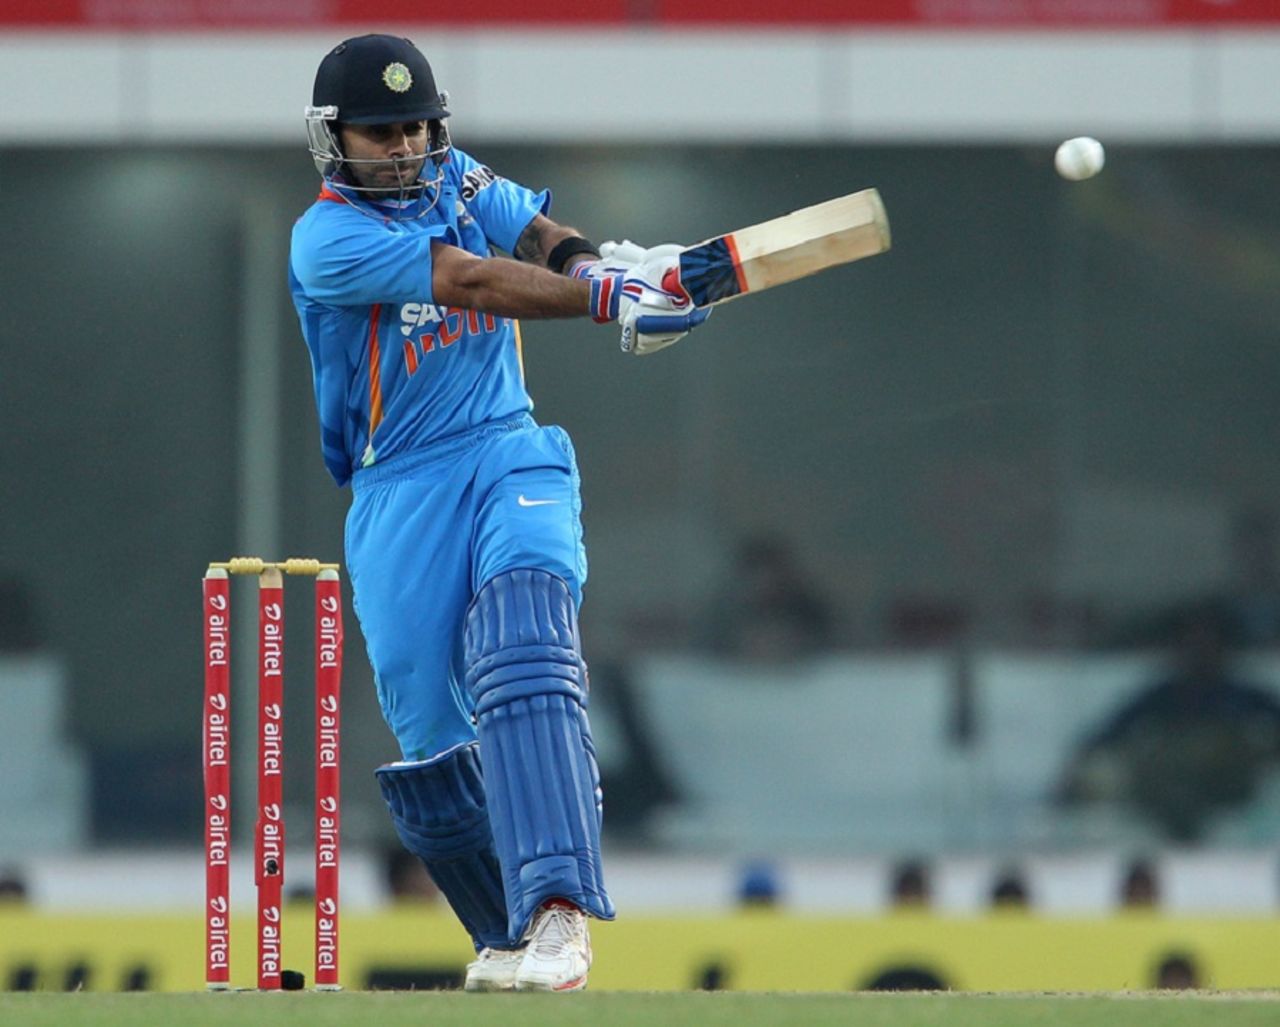 Virat Kohli struck three fours in a row in the sixth over of the Indian innings, India v England, 3rd ODI, Ranchi, January 19, 2013